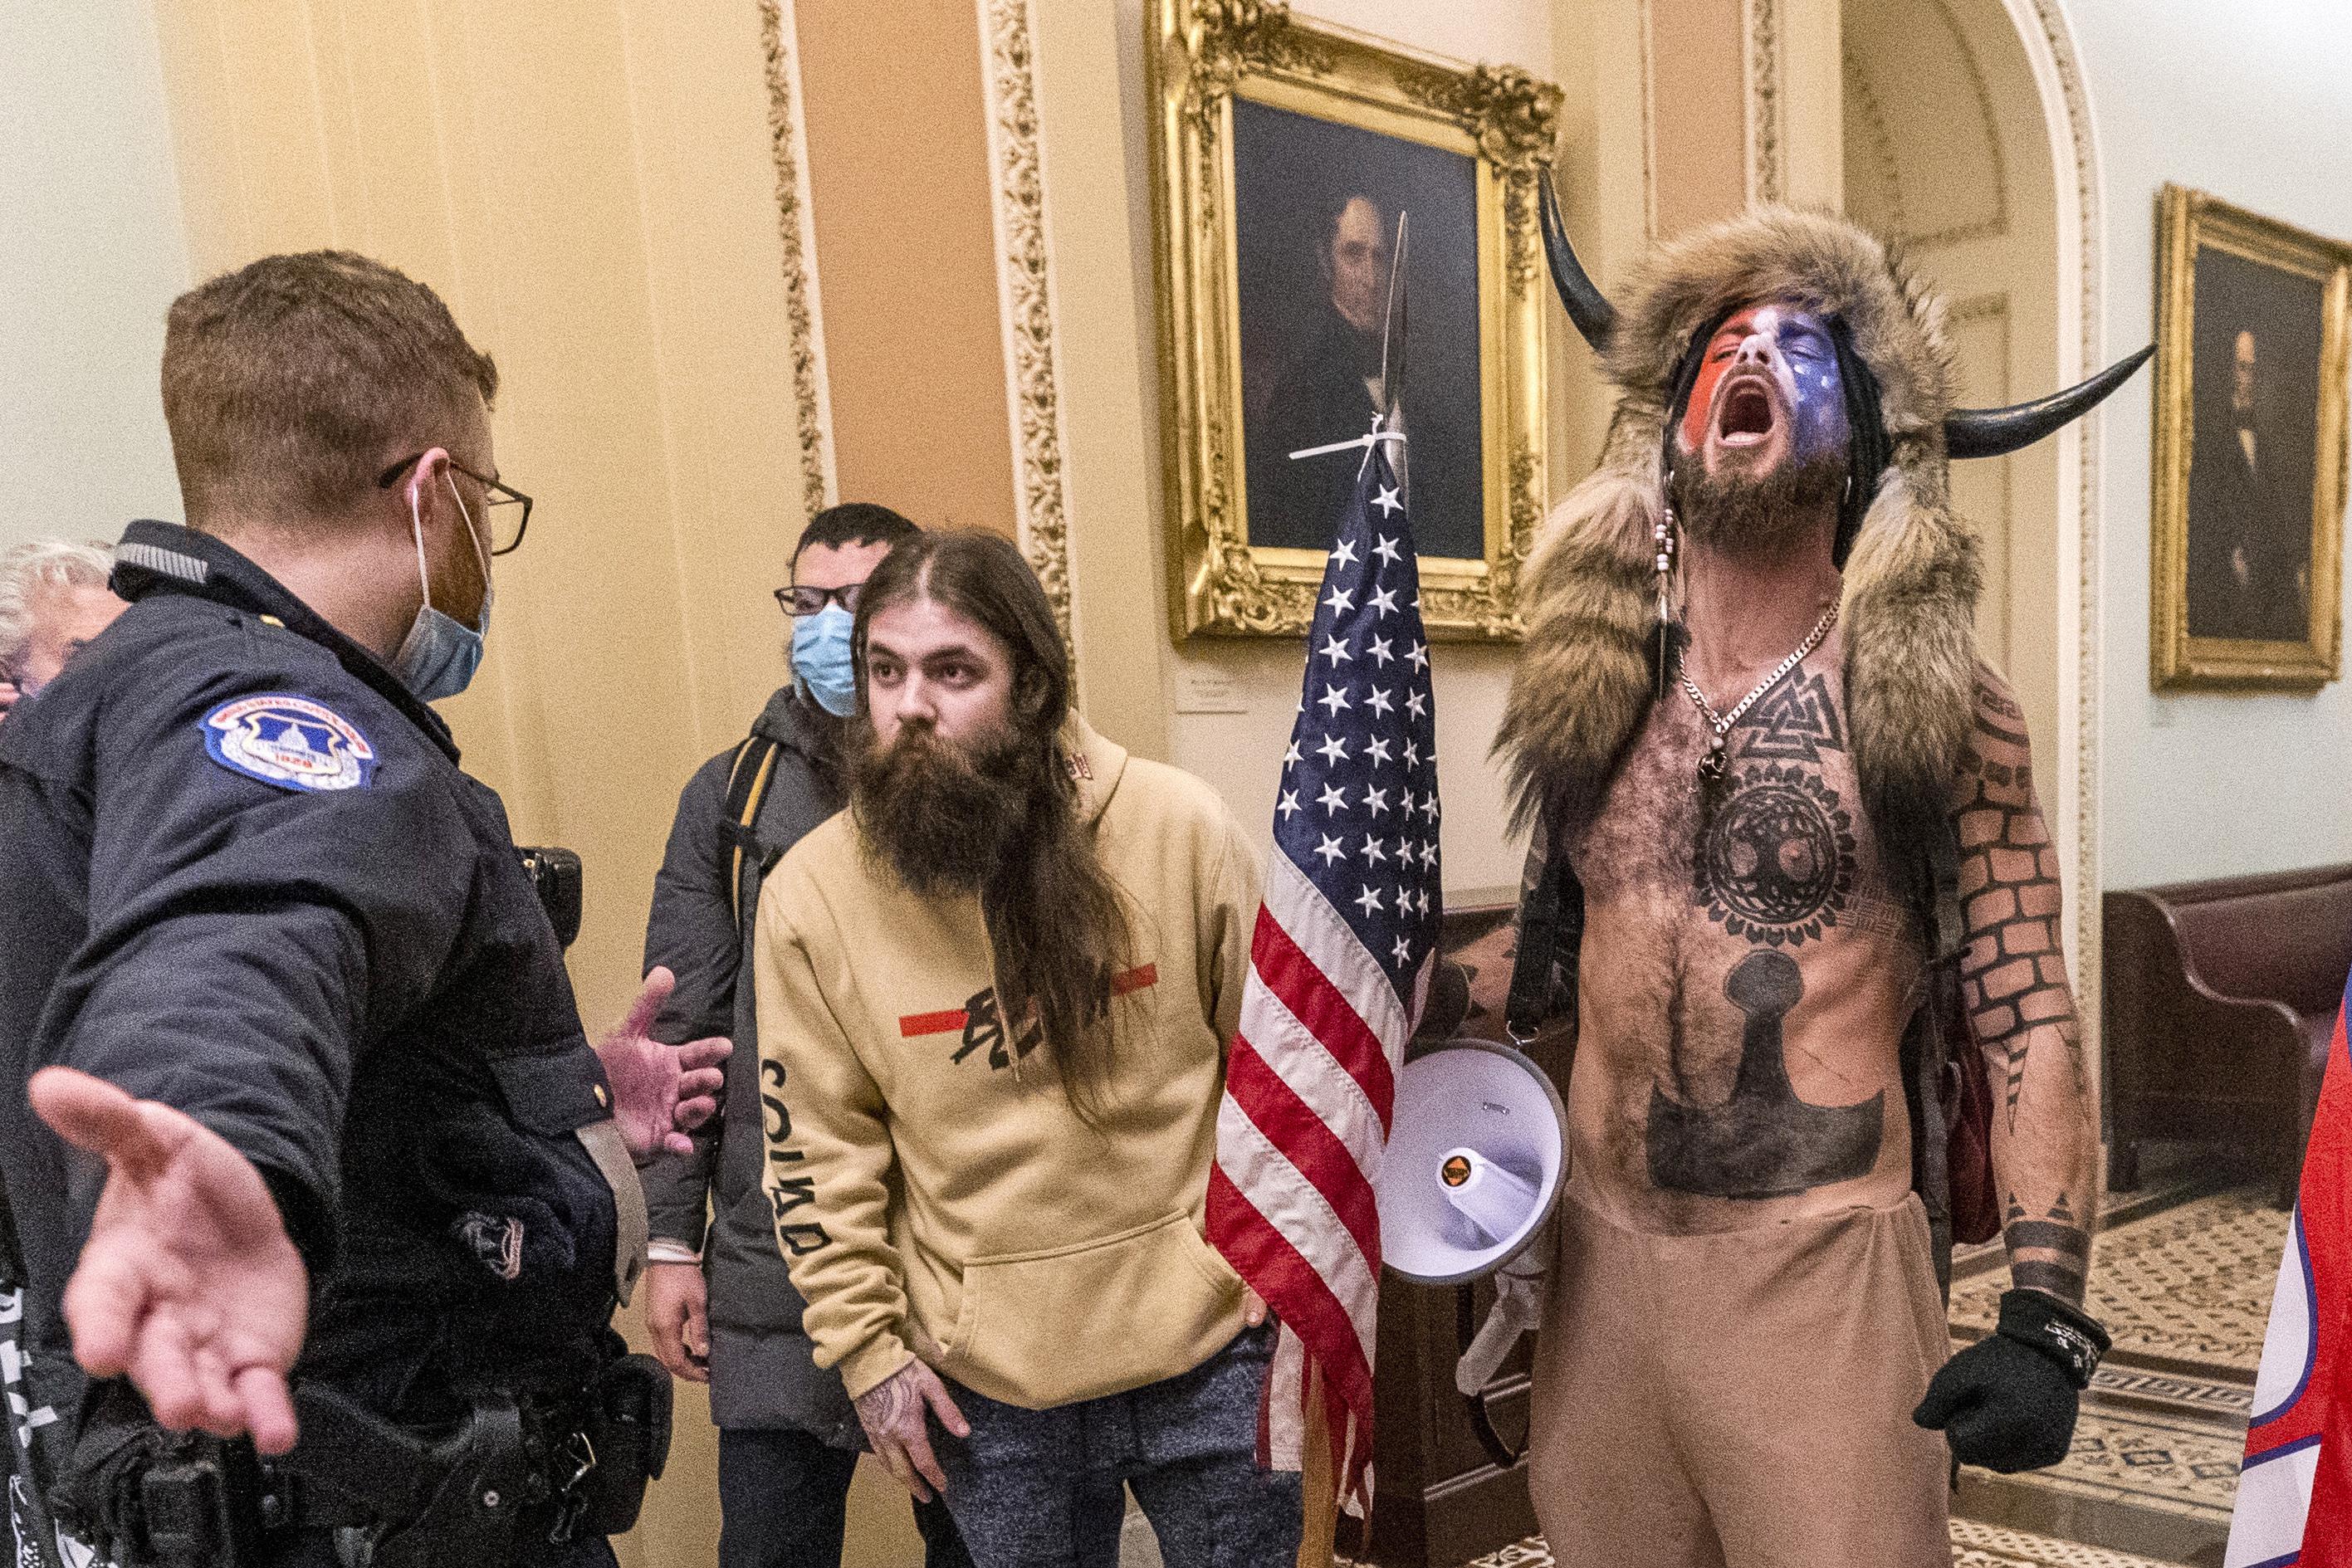 Man who wore horns in disturbances apologizes for breaking into the Capitol